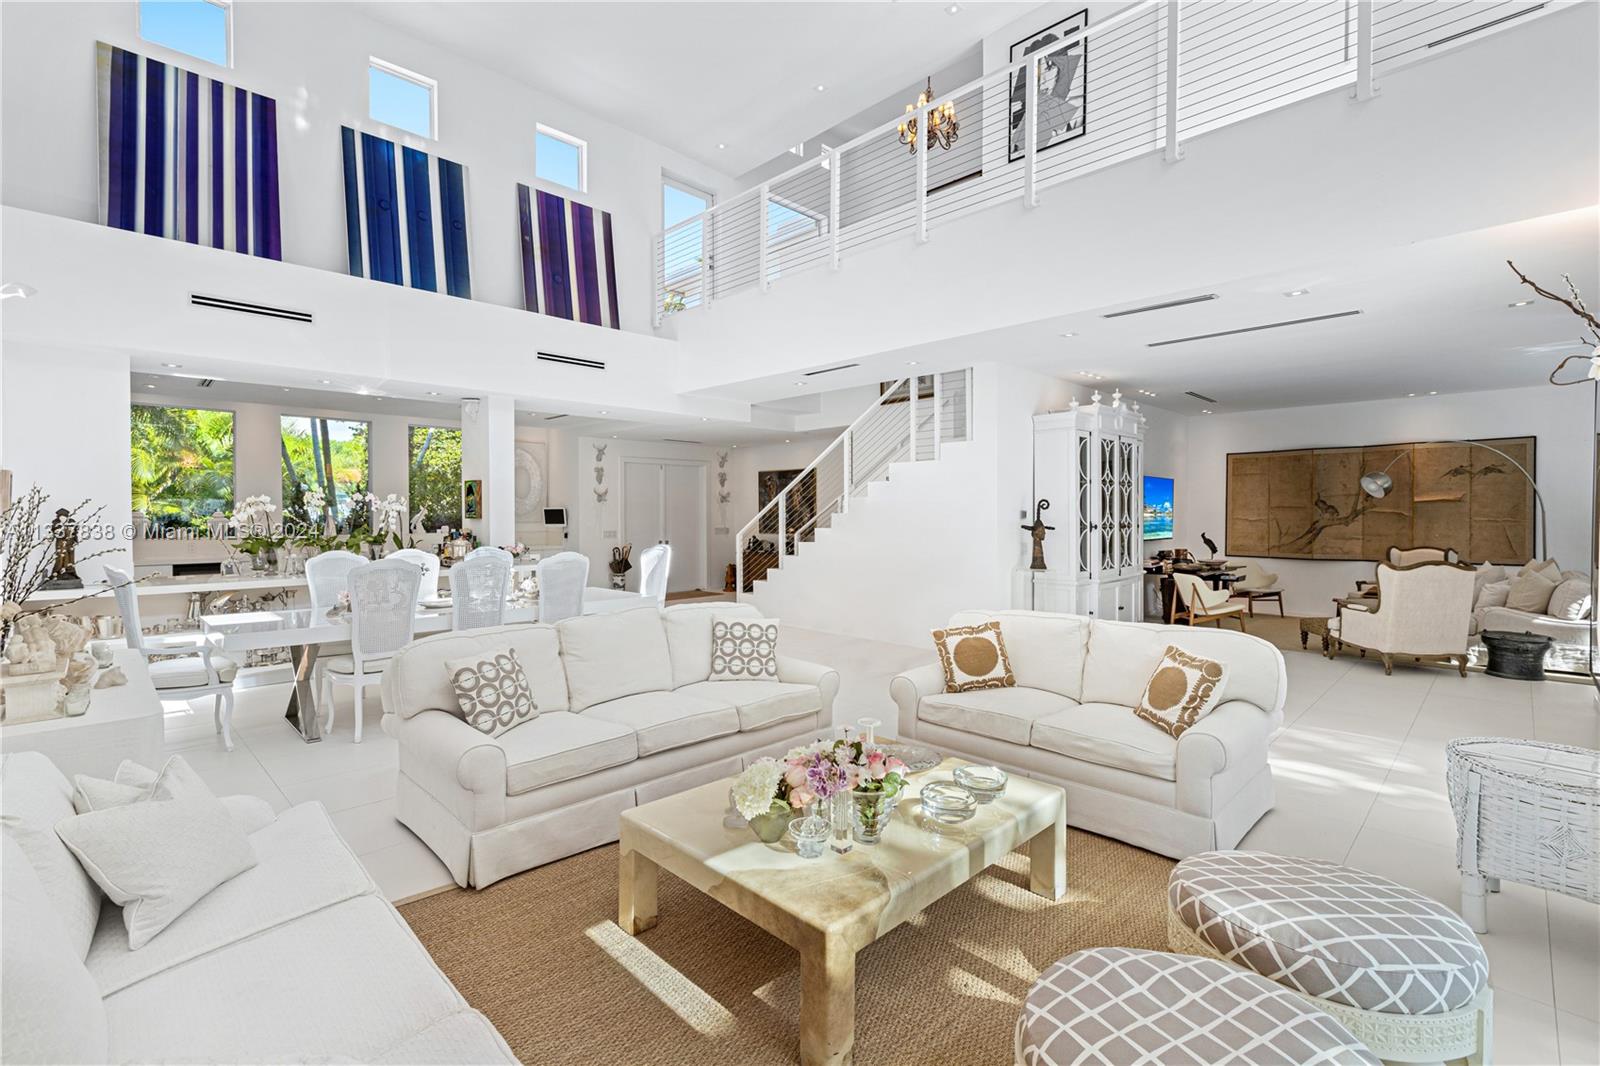 ENJOY THE PEACEFUL AESTHETIC OF THIS TREE-LINED KEY BISCAYNE MiMo STYLE FAMILY ESTATE WITH SOARING 25 FT CEILINGS ON OVERSIZED CORNER LOT! 4,021 SF Home Nestled in Nature w/ 5 Bedrooms + 4.5 Baths on Large 8,000 SF LOT. Light & Bright Grand OPEN Livingroom Boasts Double Height Ceilings w/ Recessed Lighting & Lineal AC Diffusers. Family Room & Dining Area flow into the Modern Eat-in Chef’s Kitchen in White featuring an Oversized Island, Miele Stainless Steel Appliances & Wine Refrigerator w/ Windows overlooking Lush Greenery. White Staircase Leads to Large Primary Suite w/ 2 Walk-in Closets + 2 Terraces. Primary Bath Wrapped in White w/ Floating Tub & Steam Rainshower. Outdoor Entertaining & Lounging Areas sit on White Wood Deck. Pool wrapped by Manicured Gardens for the Utmost of Privacy.